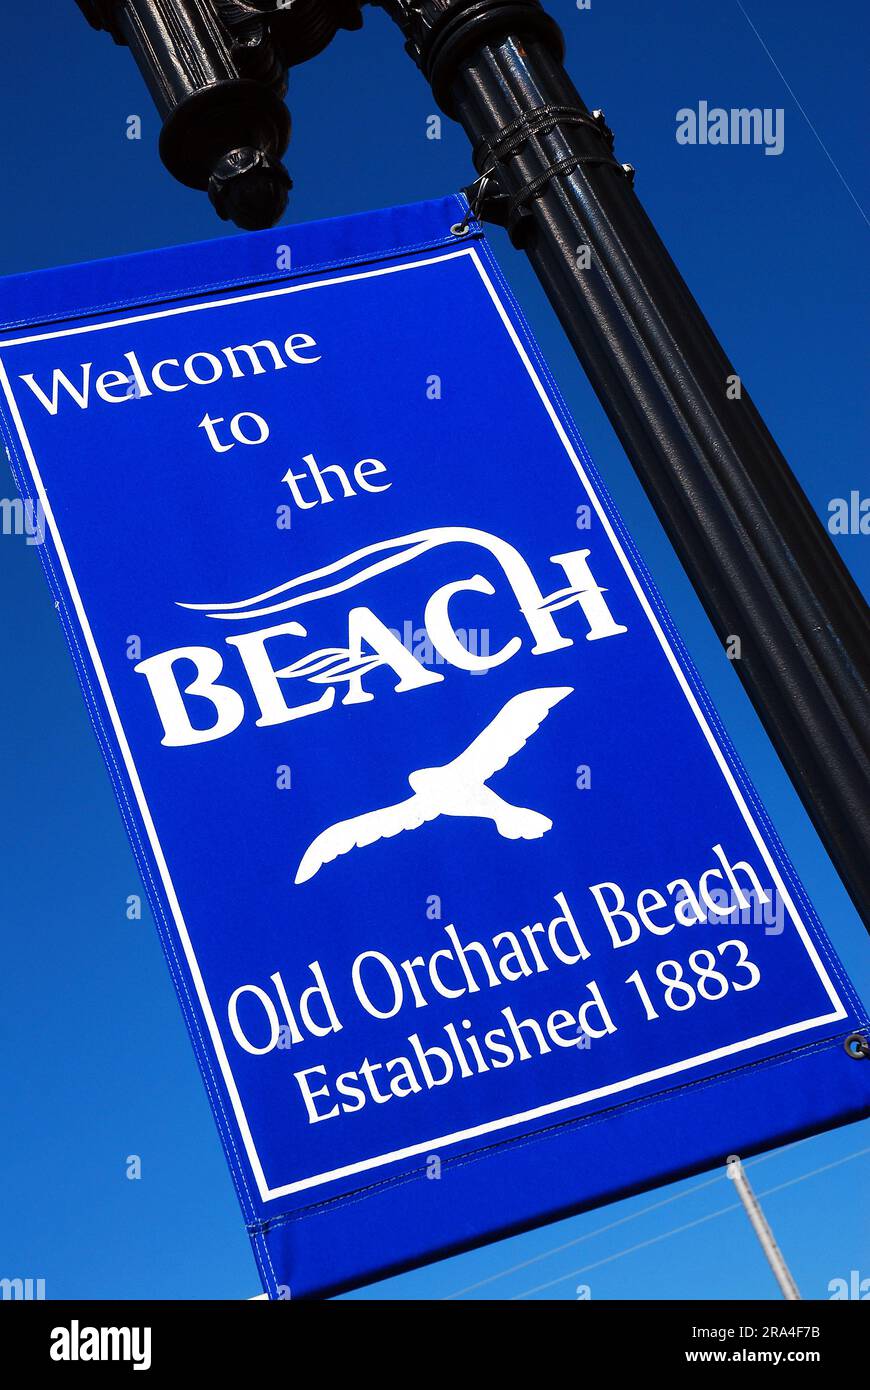 A banner in downtown welcomes visitors to Old Orchard Beach, Maine during the summer season Stock Photo